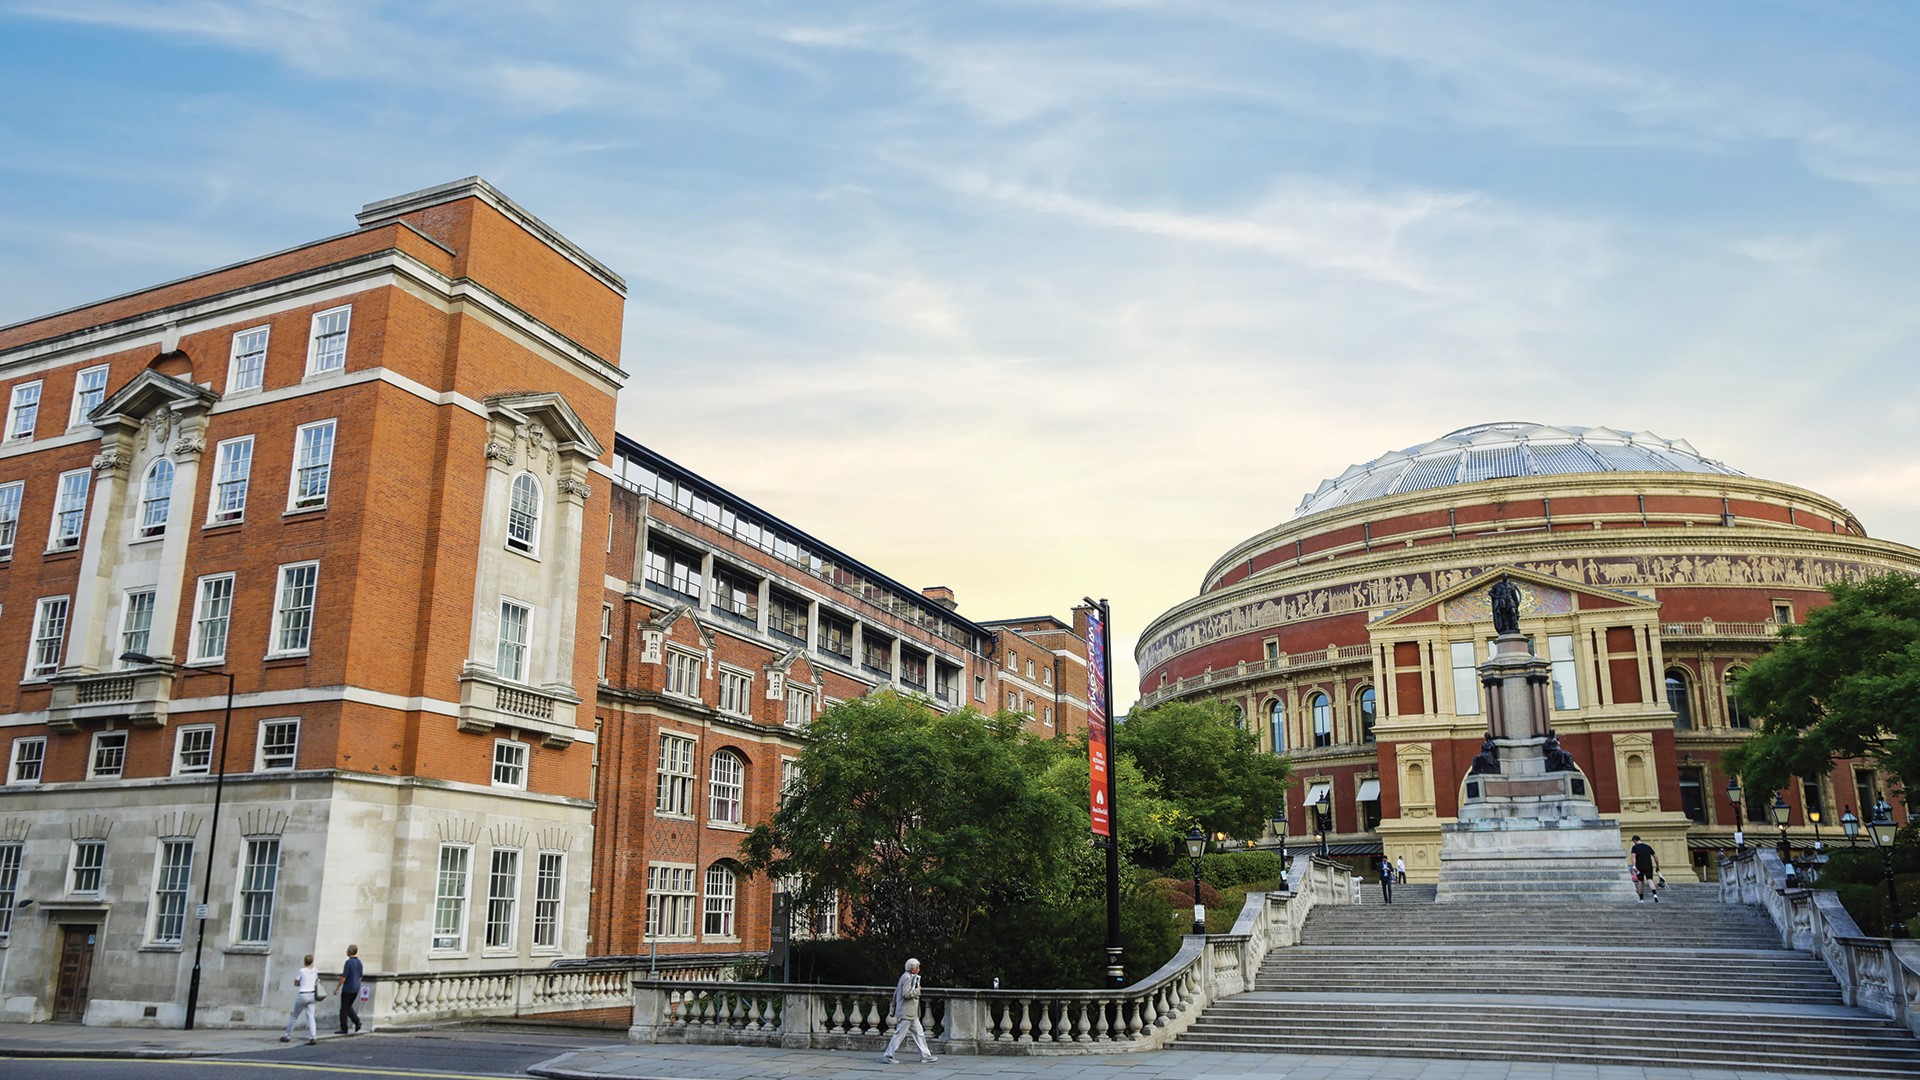 Five reasons why you should stay at Imperial College on your next